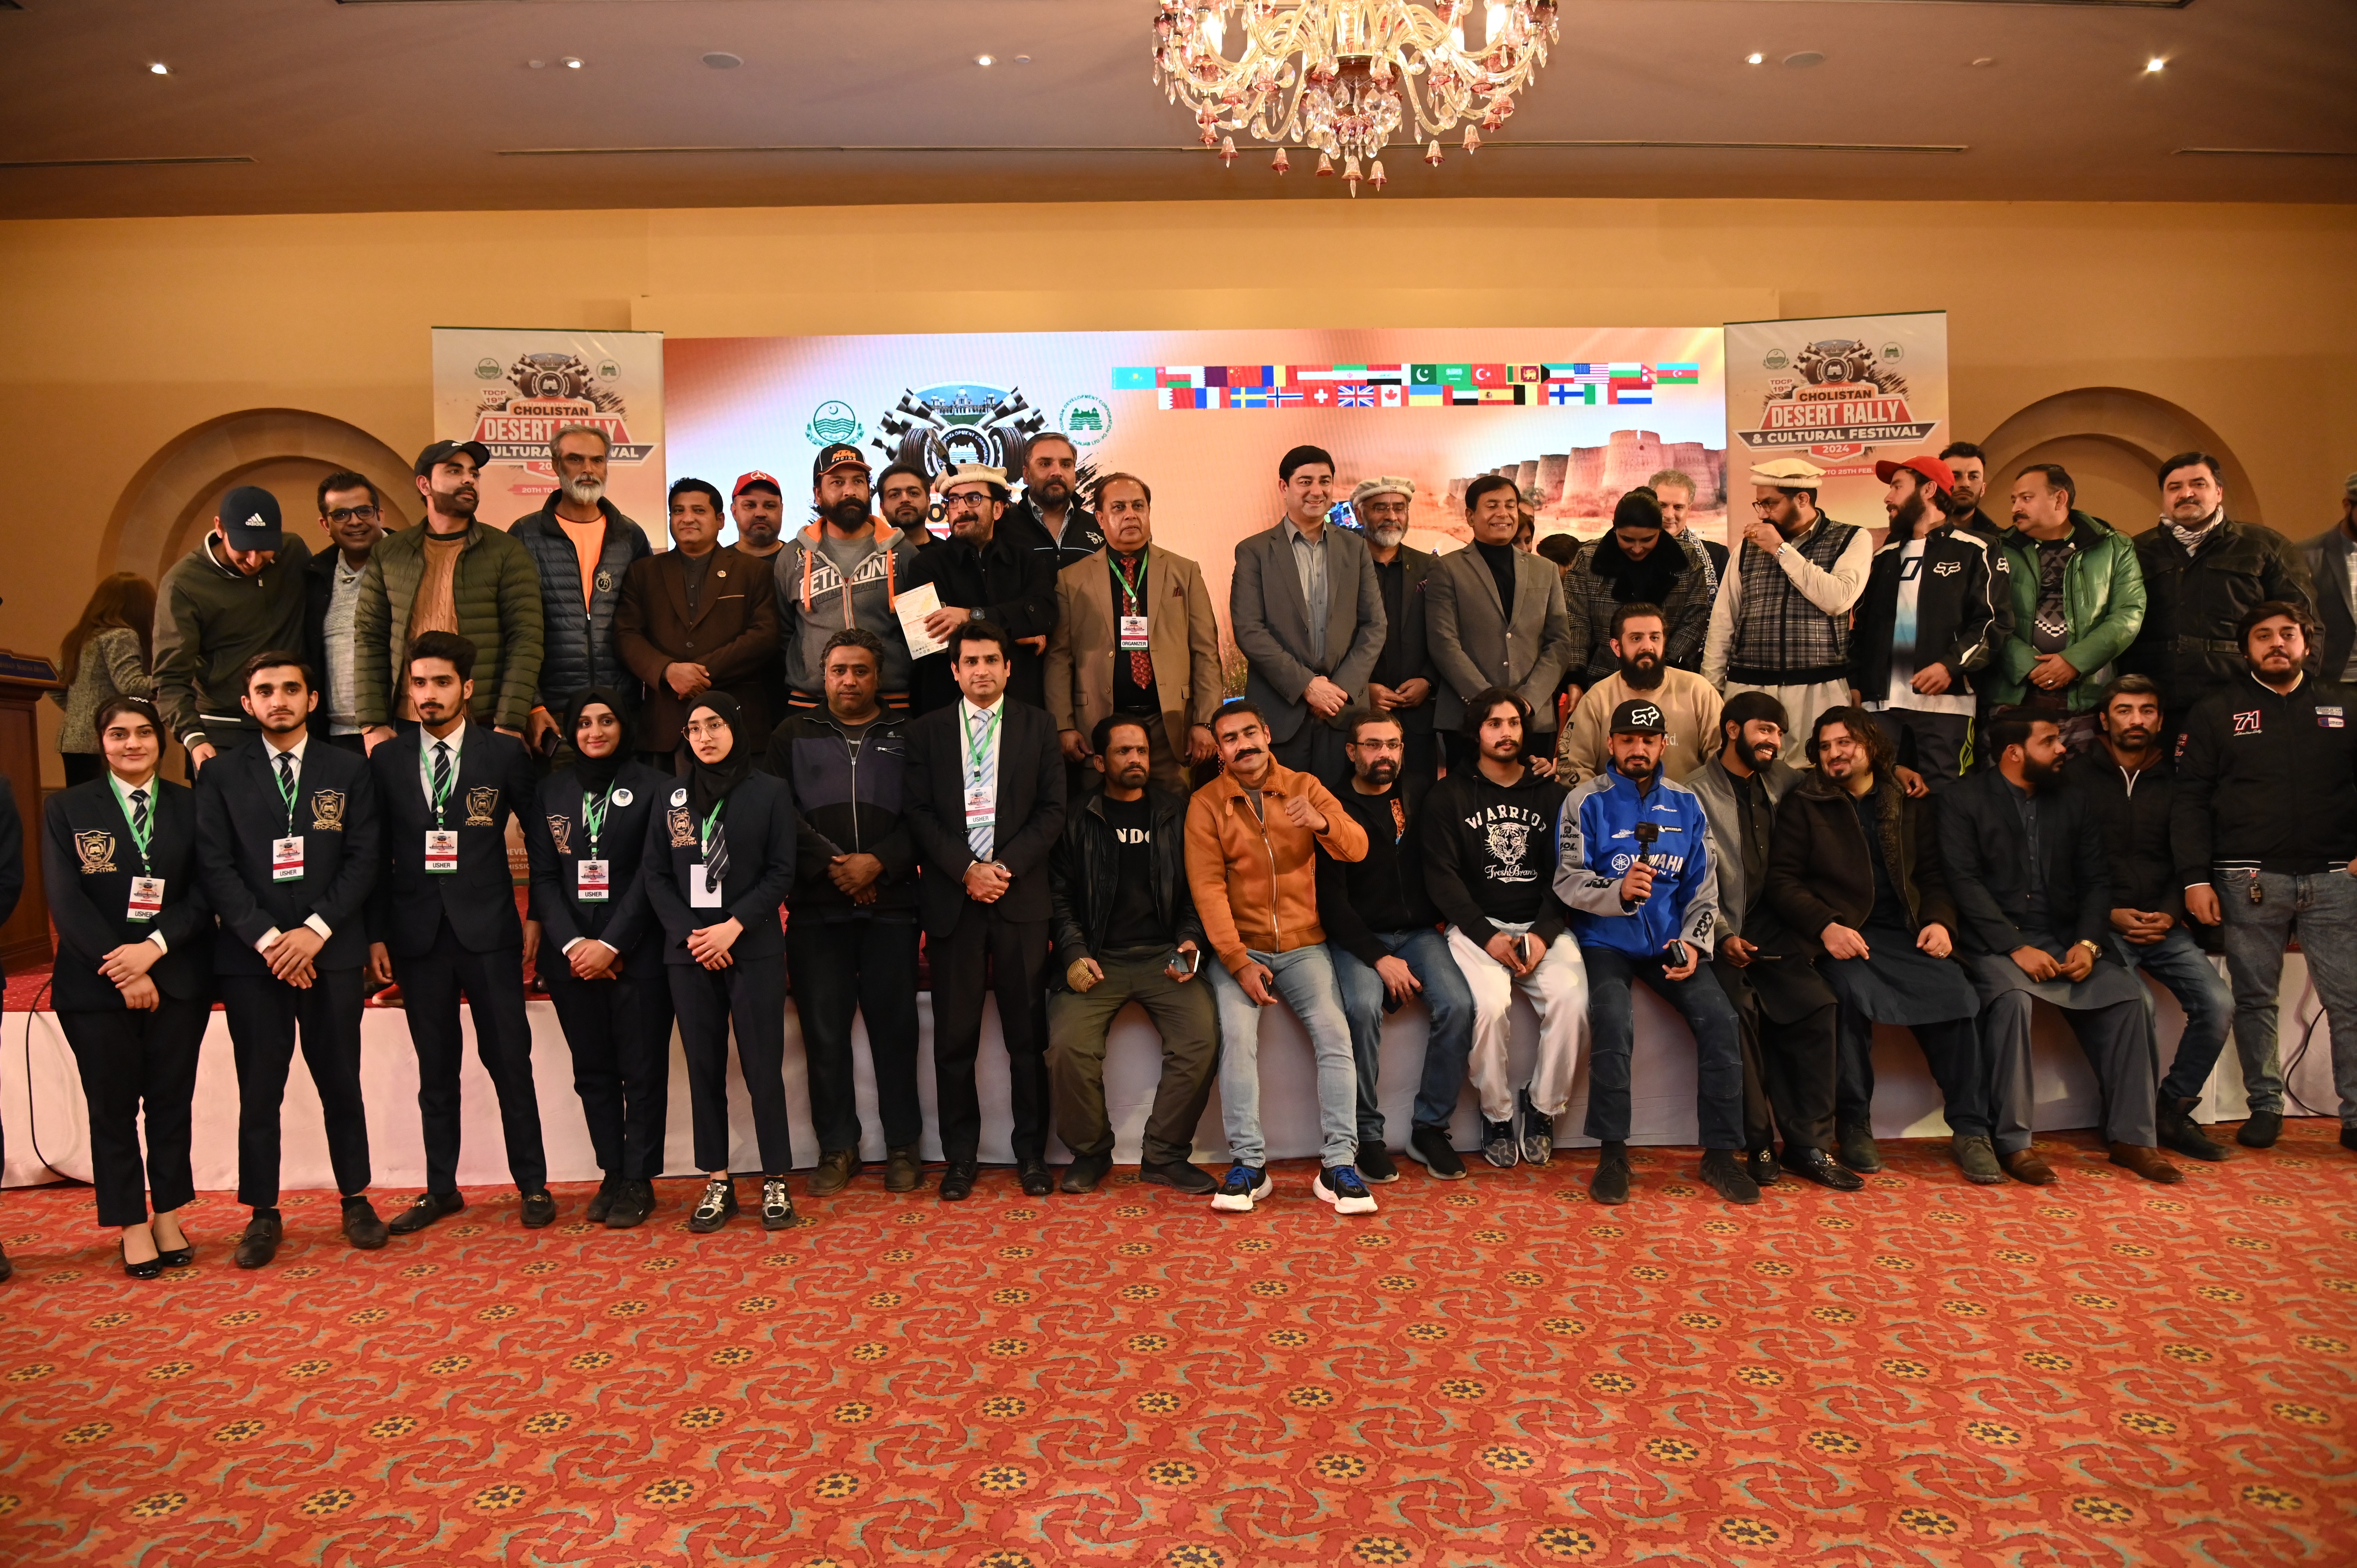 A group photo of chief guests, organizers and the participants